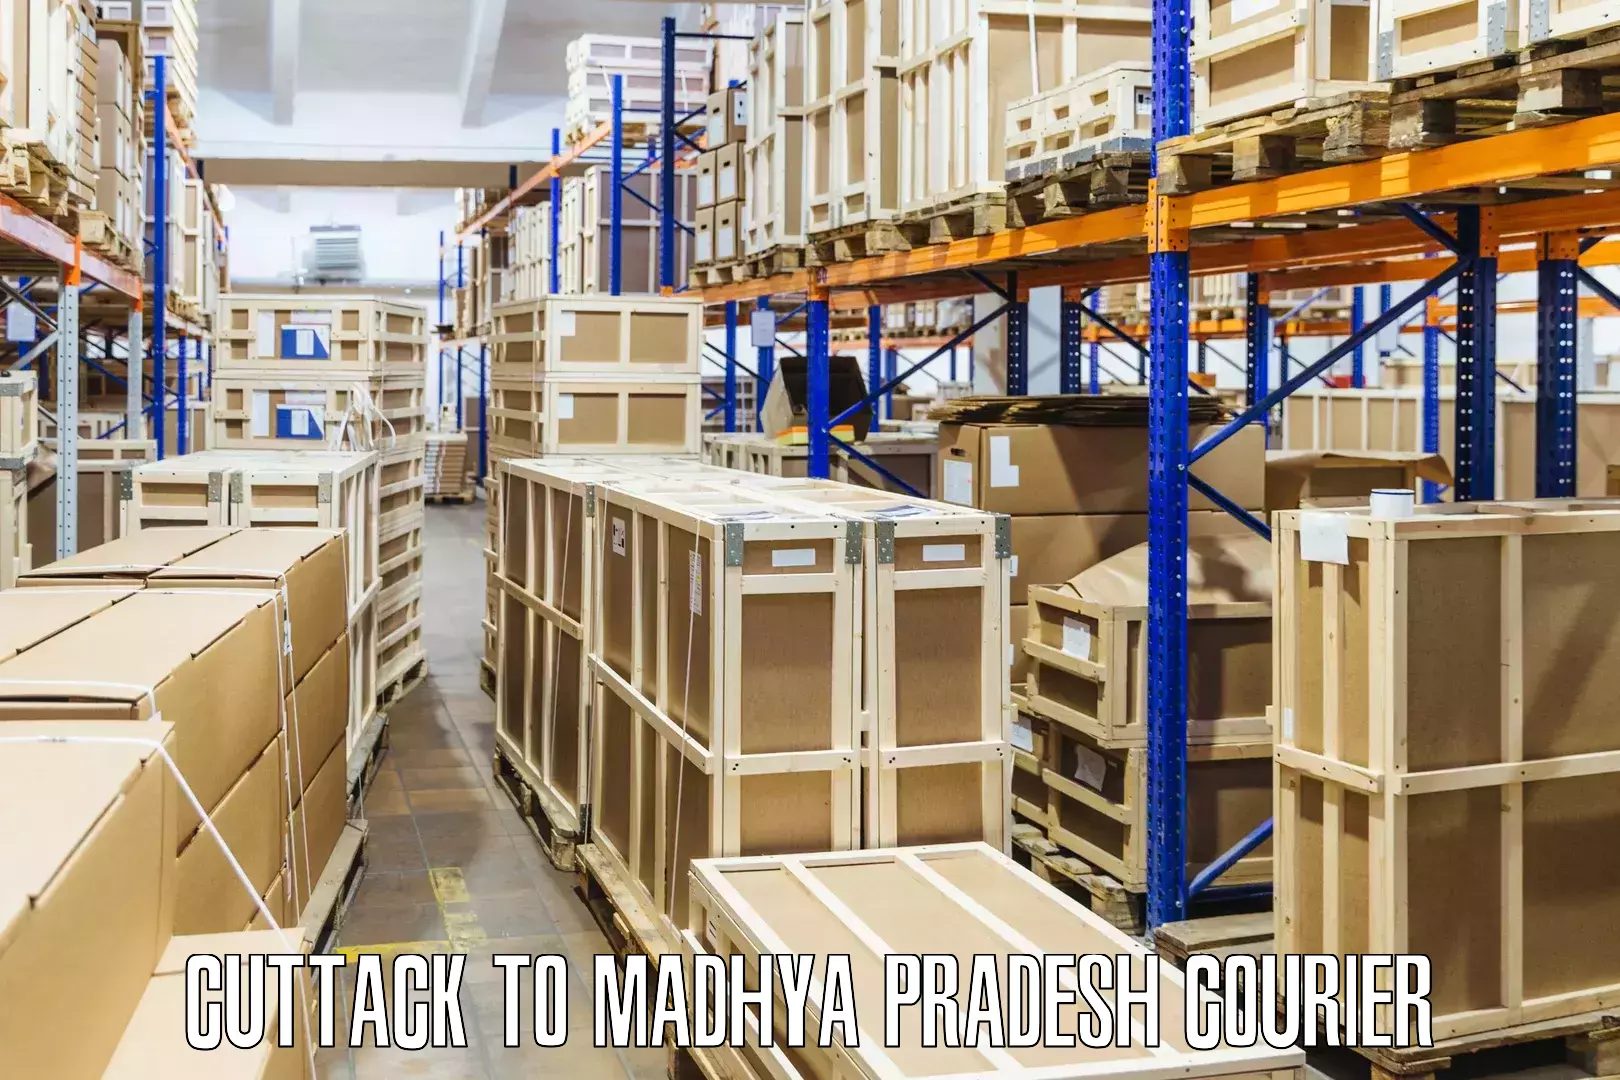 Courier service booking Cuttack to Madhya Pradesh